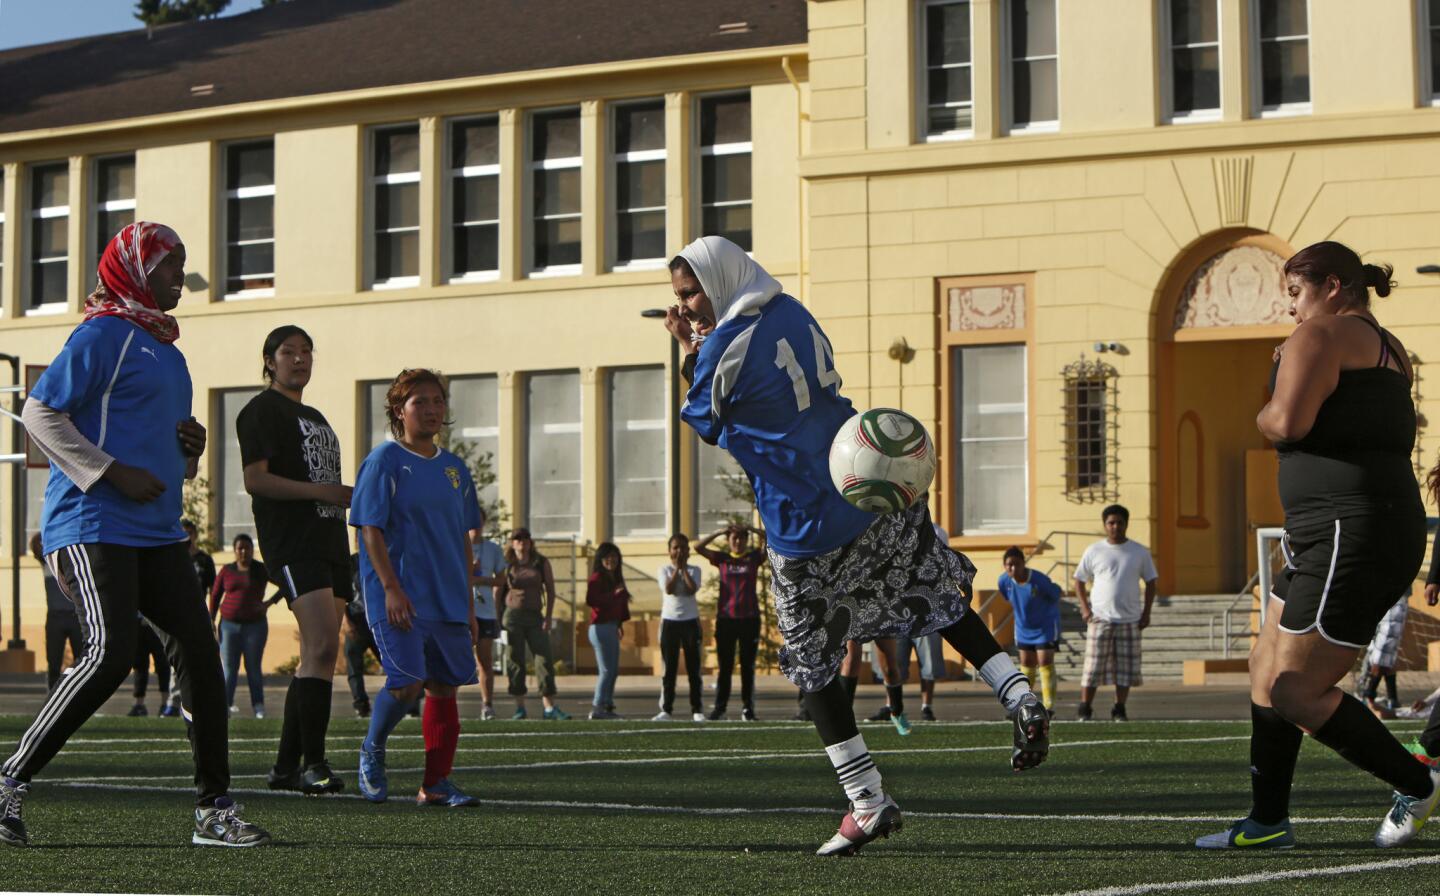 Somali student Fatuma Hussein, left, in red scarf, watches as Afghani student Marium Sarwari misses a header in their soccer match against MetWest High School in Oakland.